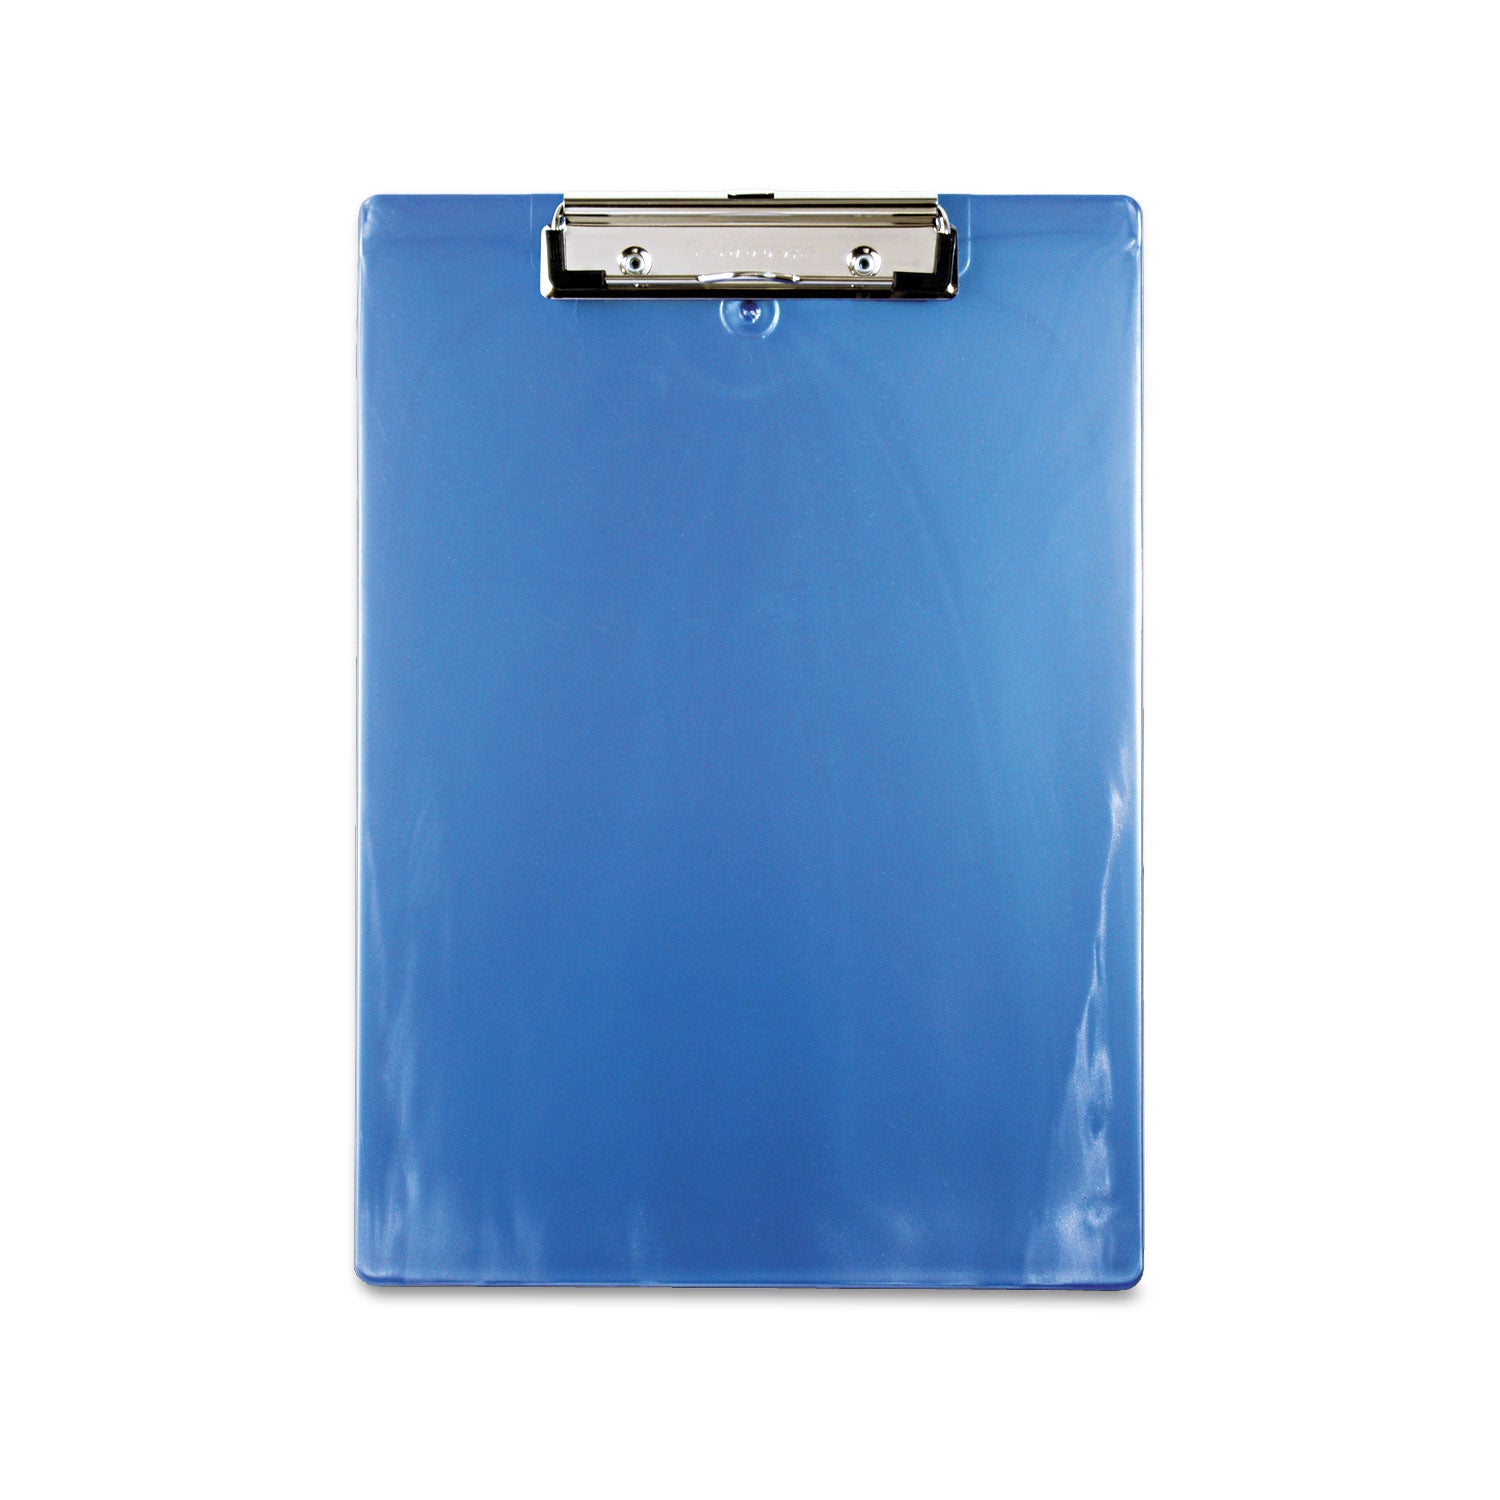 Recycled Plastic Clipboard, 0.5" Clip Capacity, Holds 8.5 x 11 Sheets, Ice Blue - 